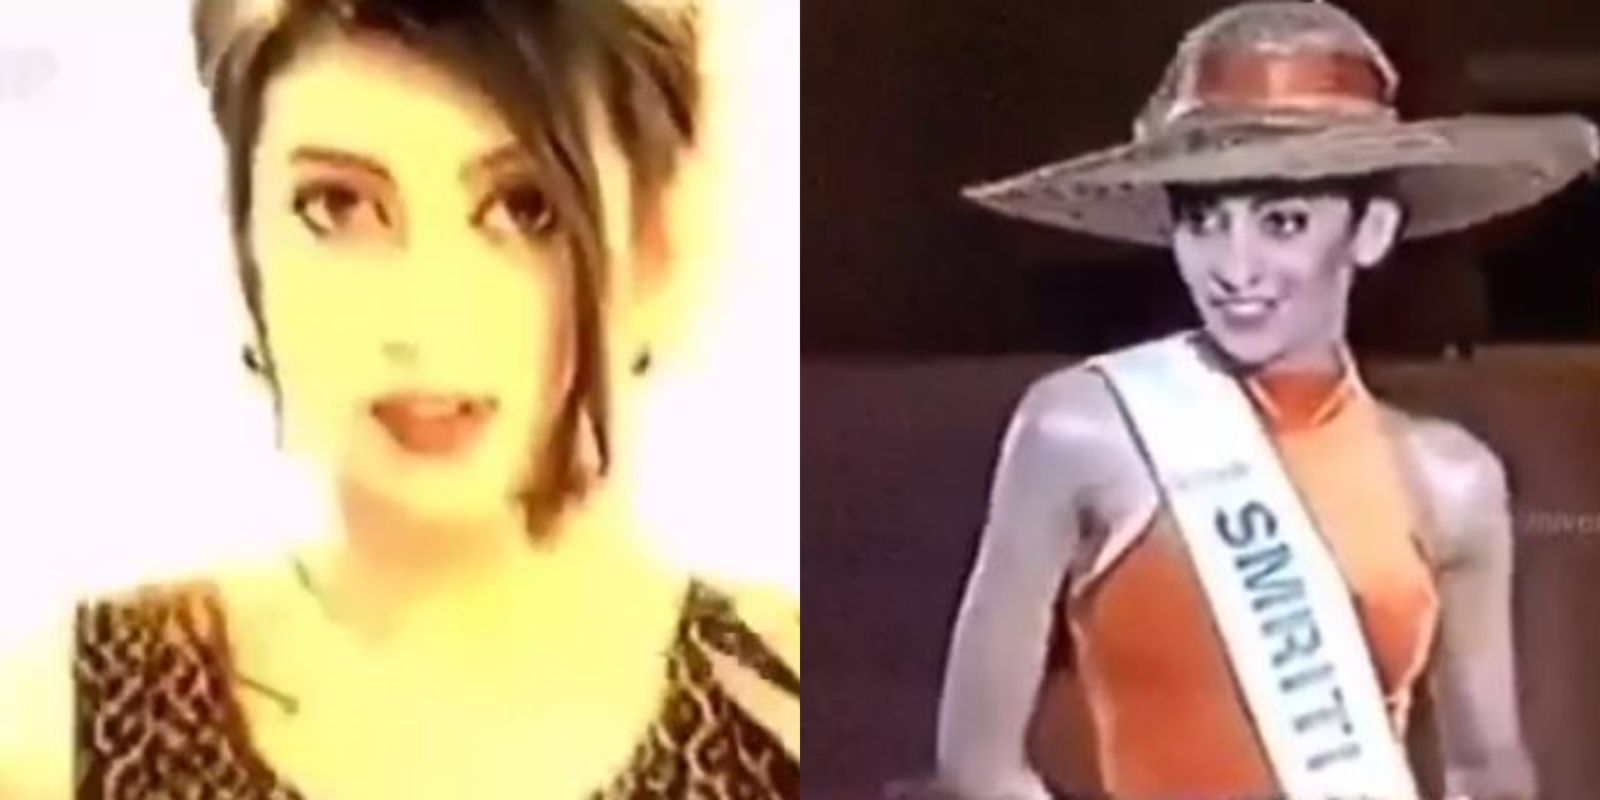 Ekta Kapoor Shares Rare Video Of Smriti Irani From The 1998 Miss India Pageant Where She Expressed Her Interest In Politics